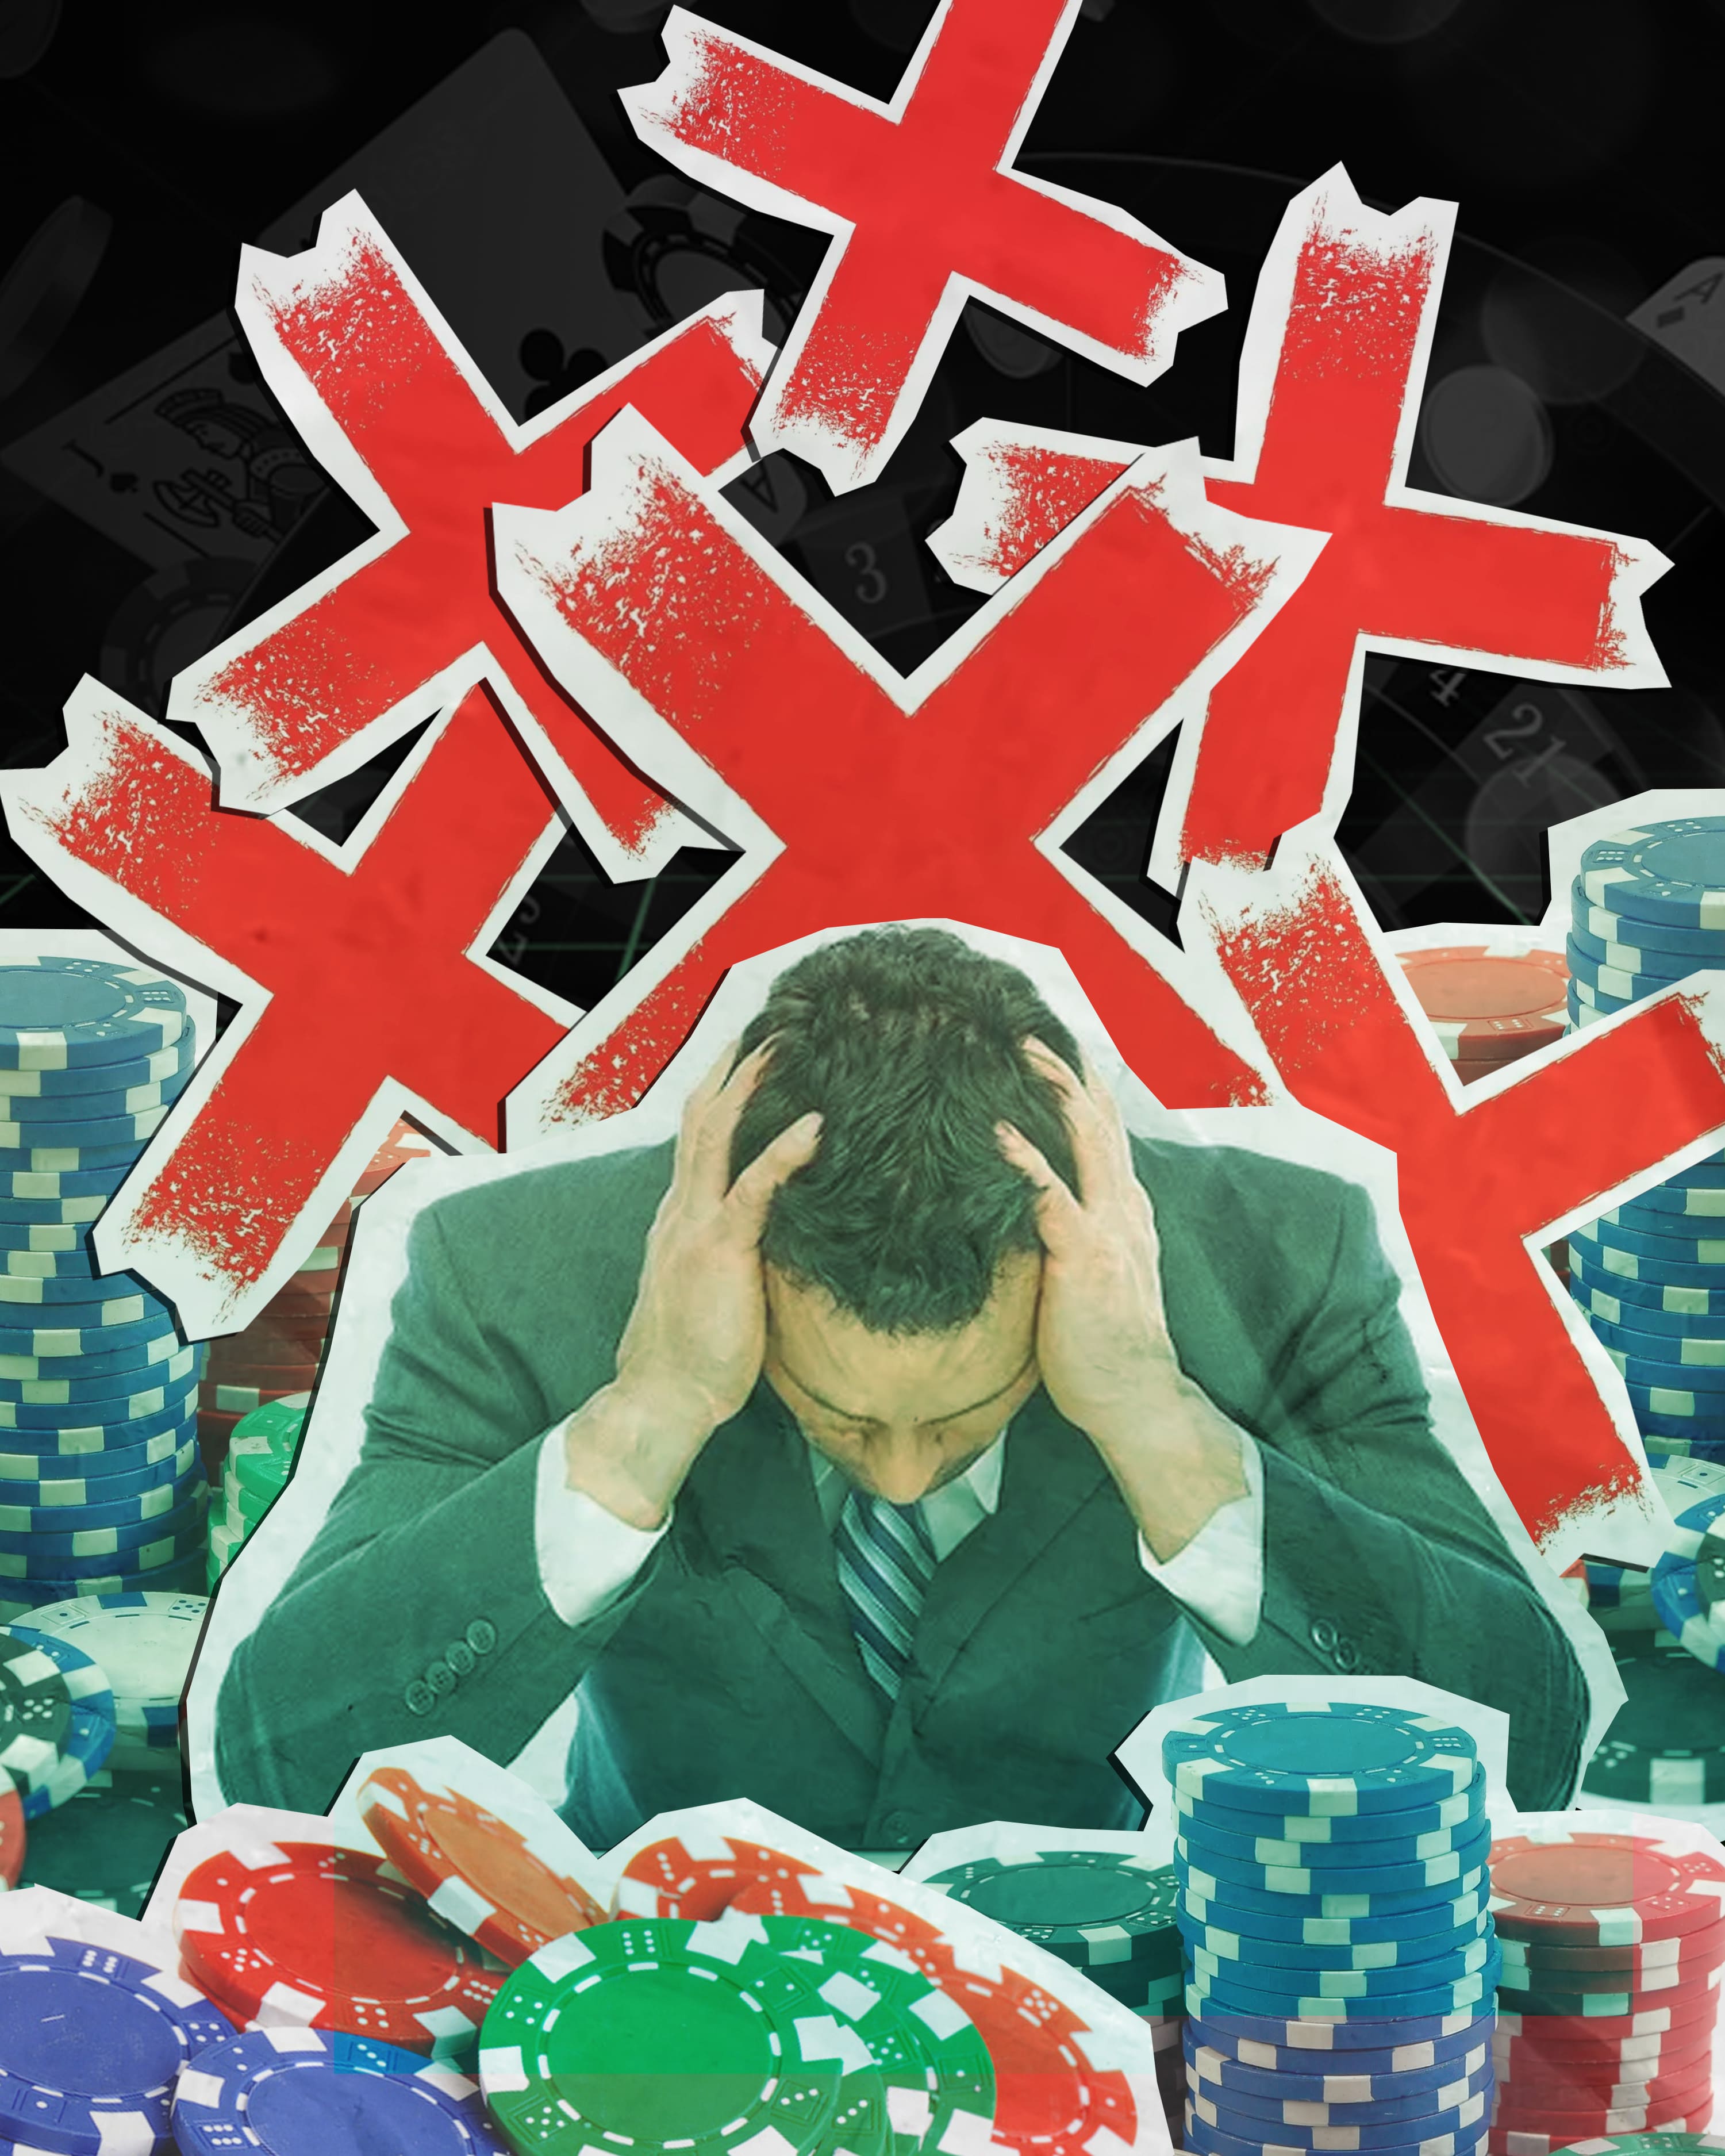 A novice in poker? Try to avoid these most common mistakes